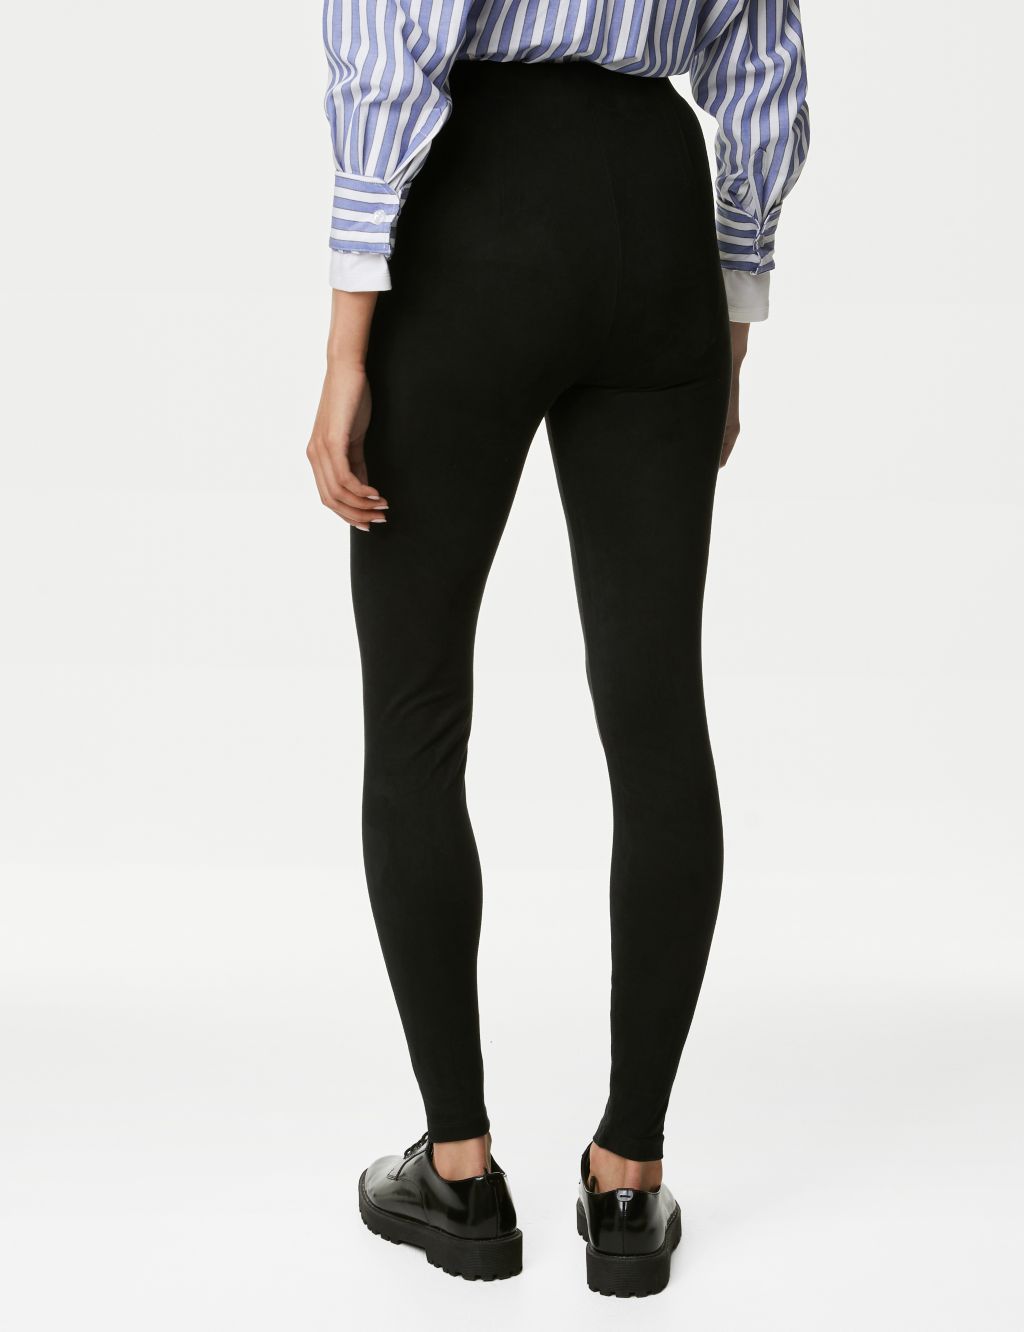 Suedette High Waisted Leggings image 5